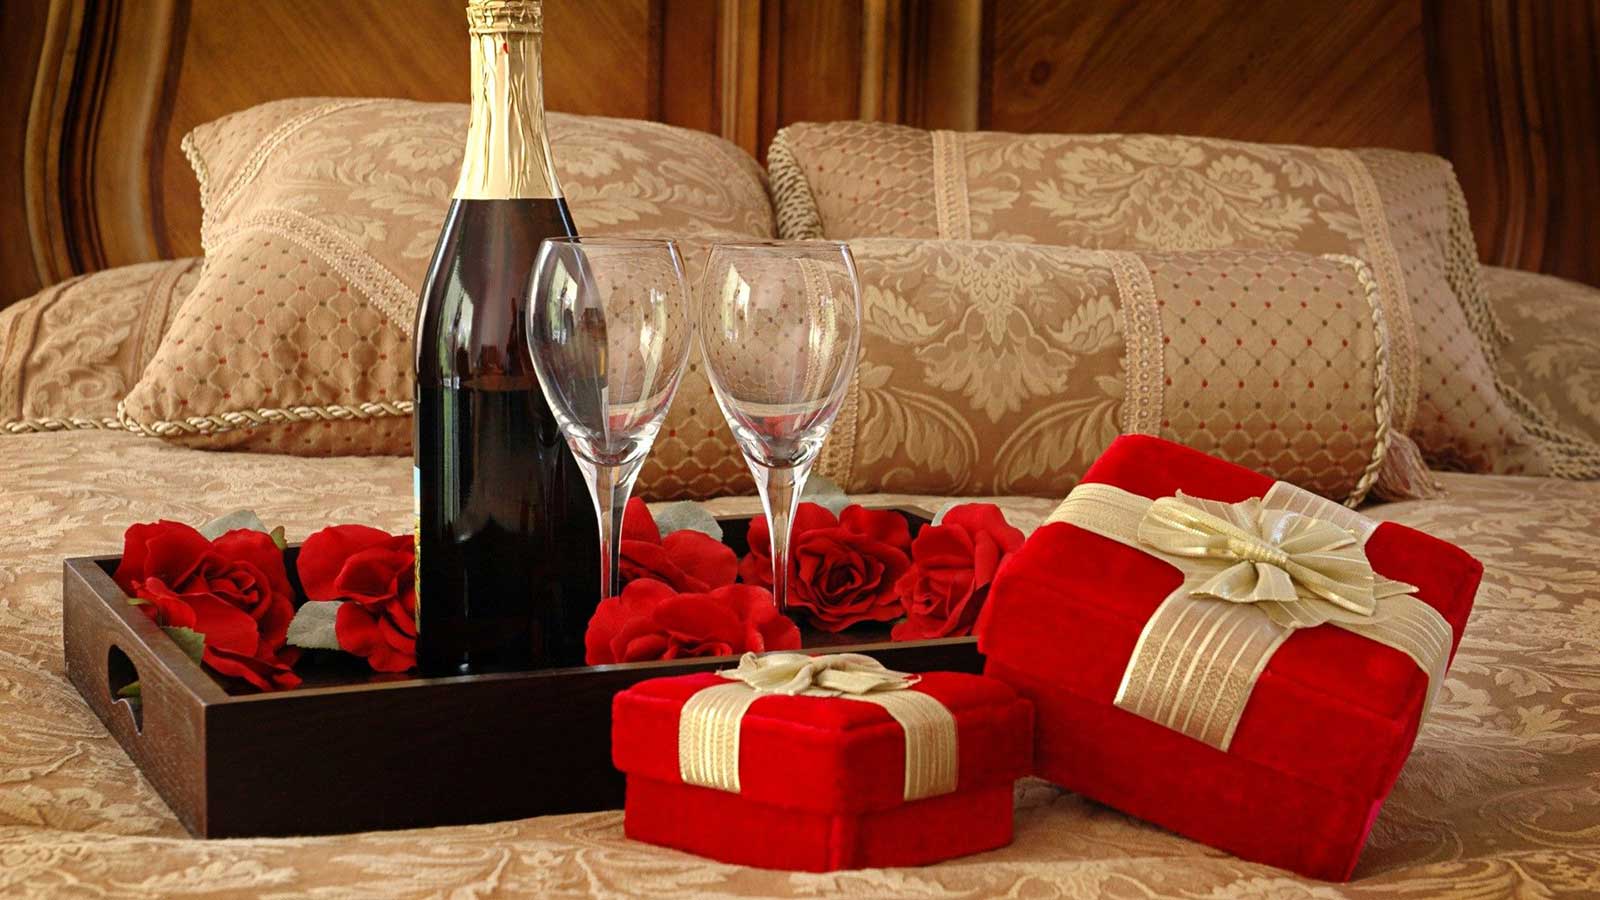 Top 10 Romantic Gift Ideas for him 